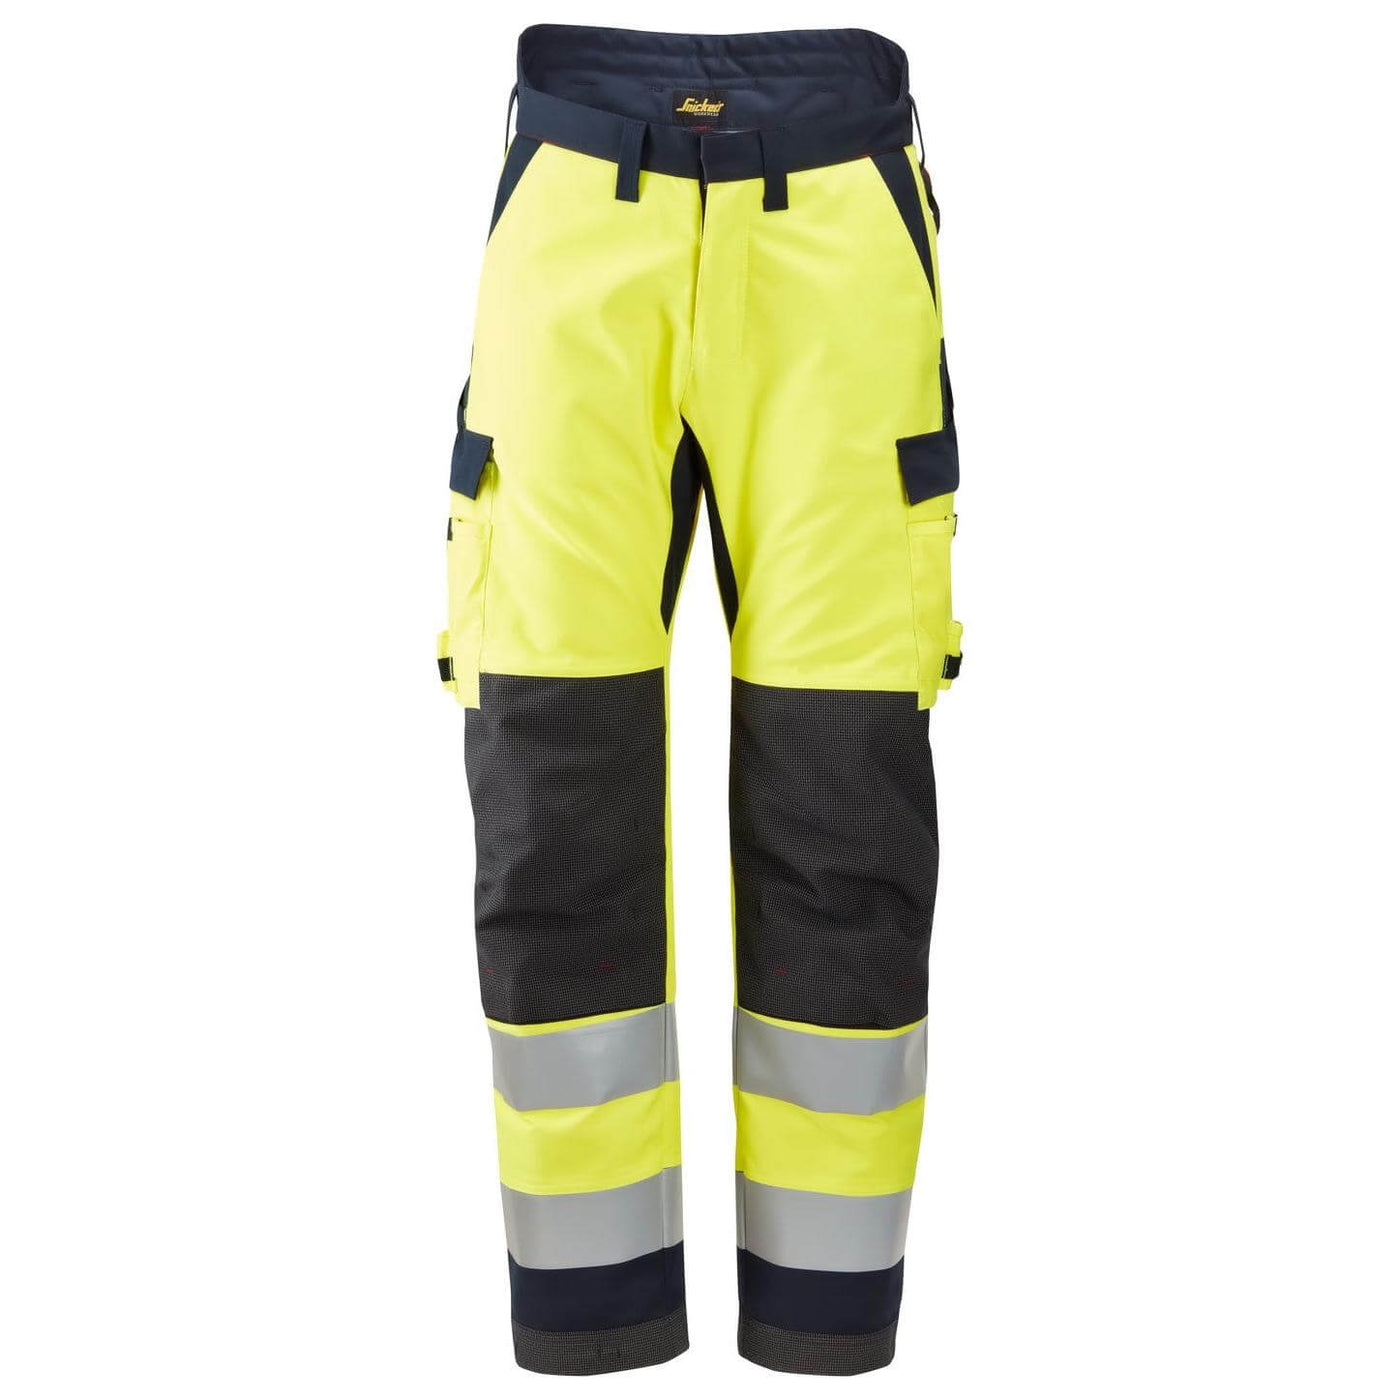 Snickers 6663 ProtecWork Hi Vis Insulated Winter Trousers Class 2 Hi Vis Yellow Navy Blue Main #colour_hi-vis-yellow-navy-blue